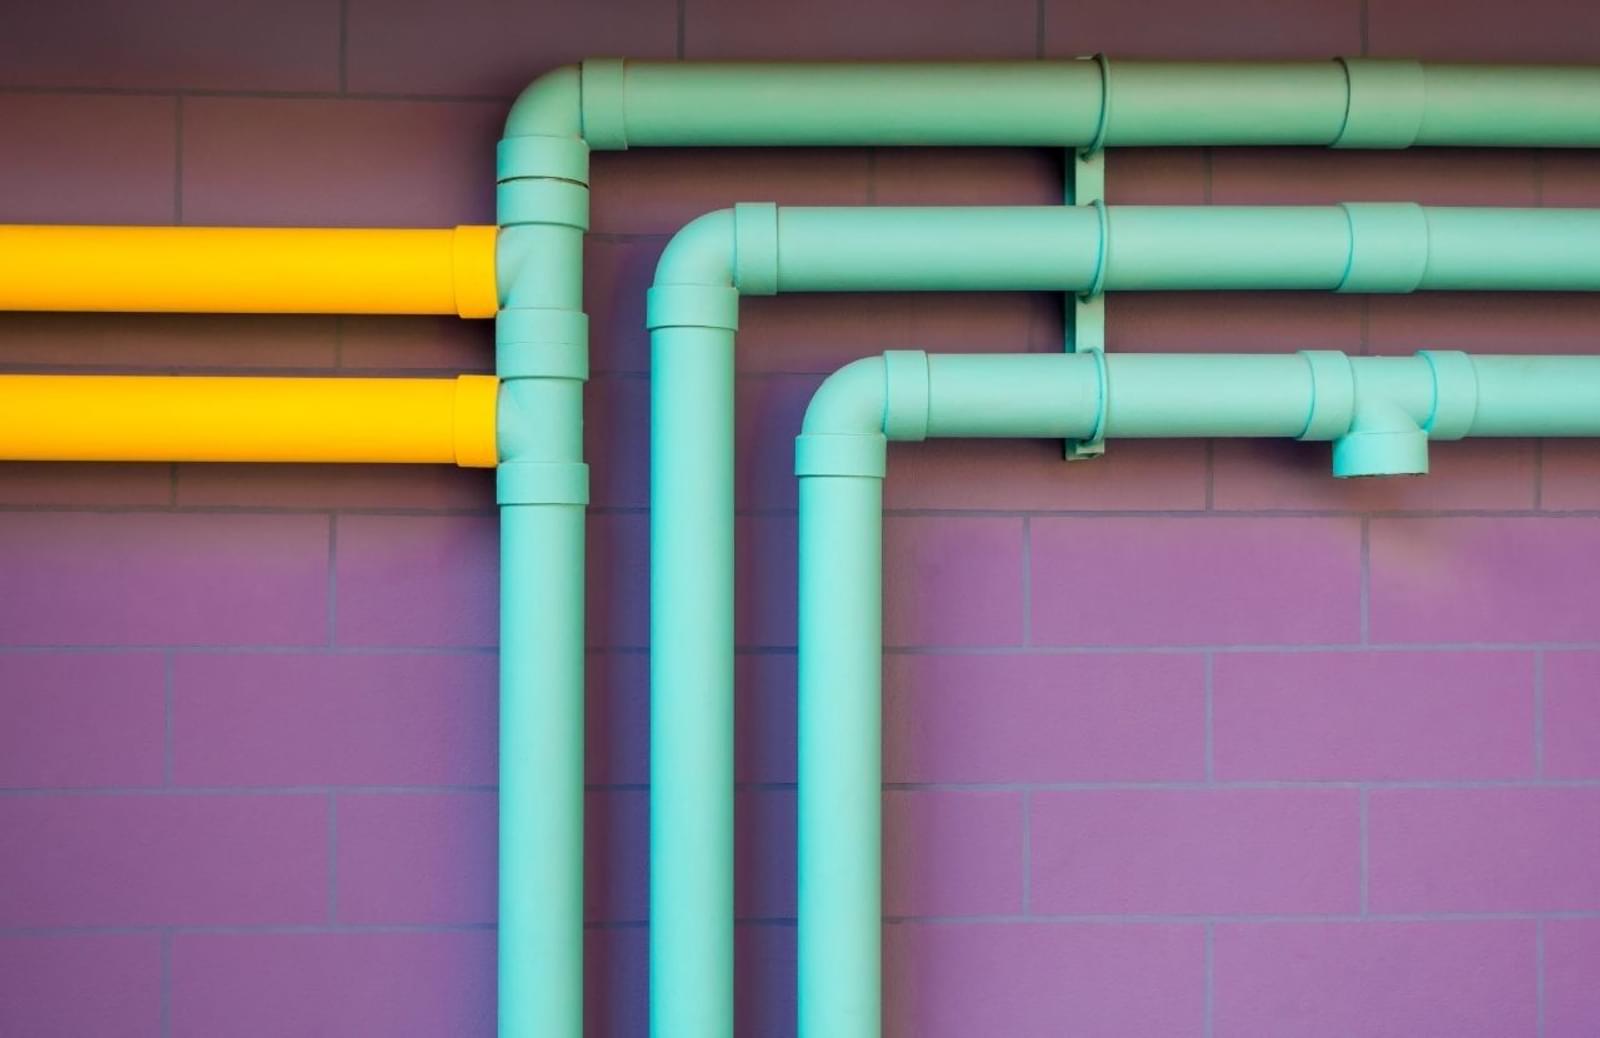 Teal and yellow pipelines against purple brick wall